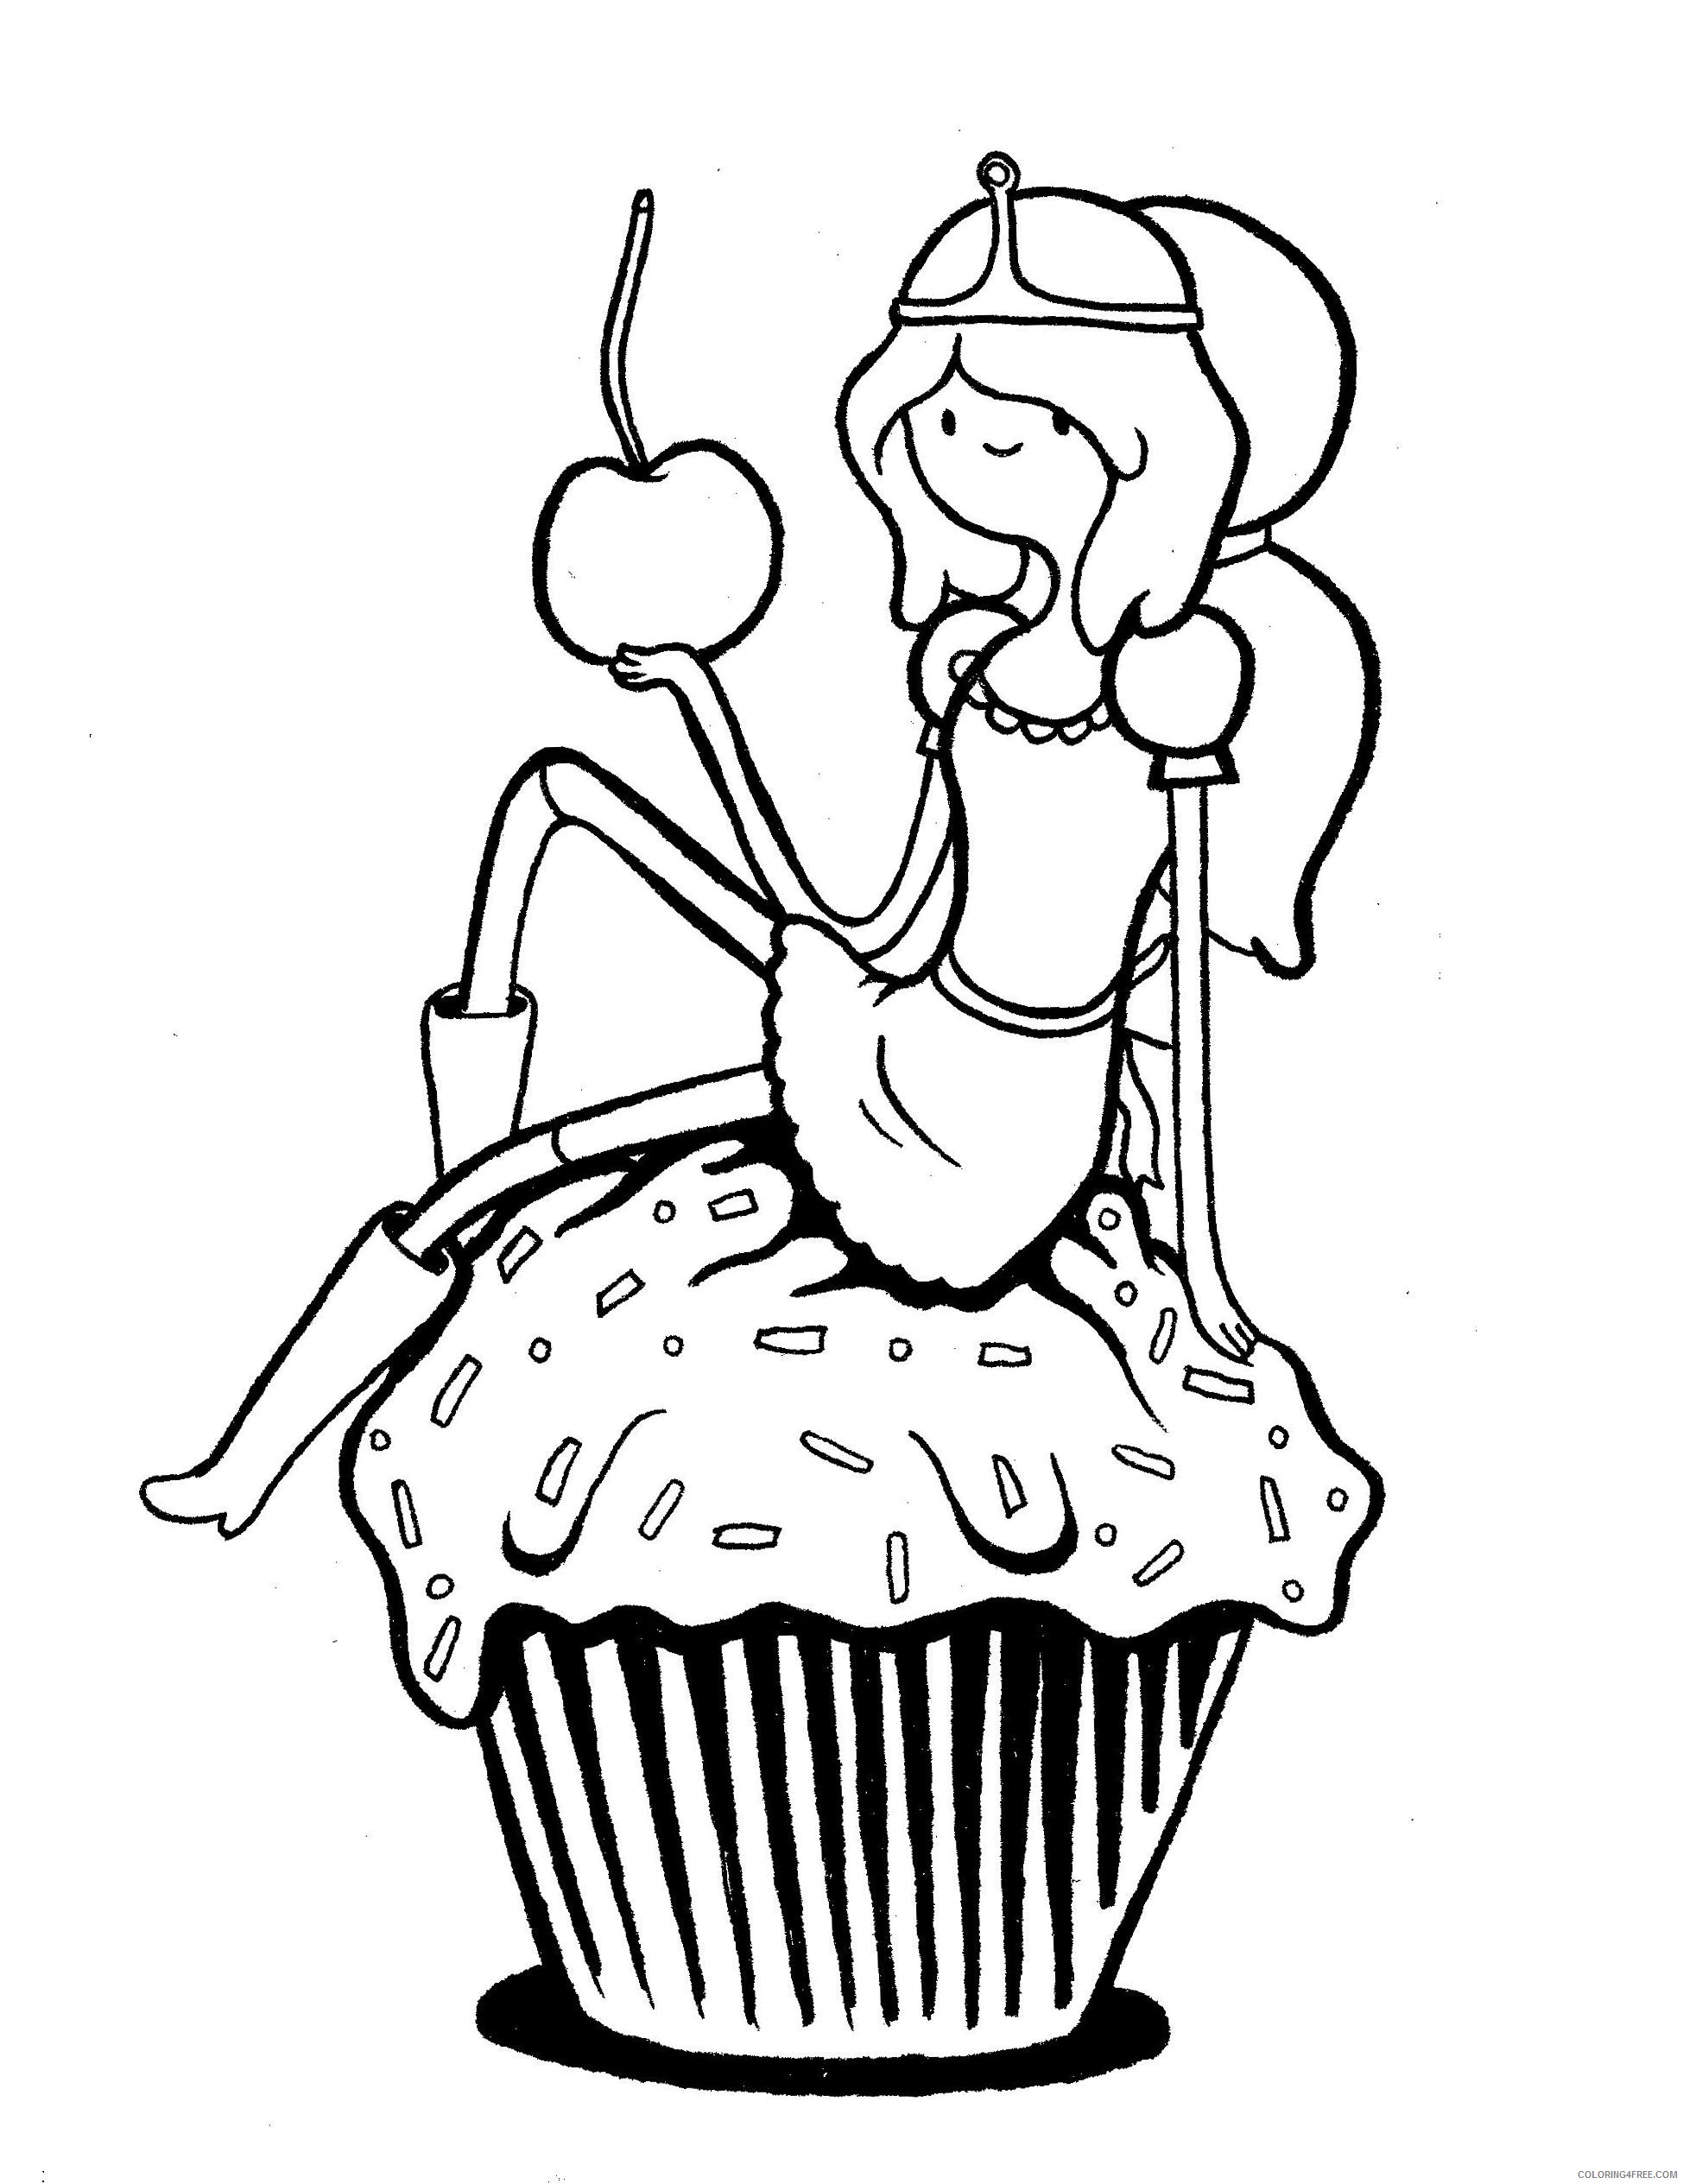 adventure time coloring pages princess bubblegum on cupcake Coloring4free